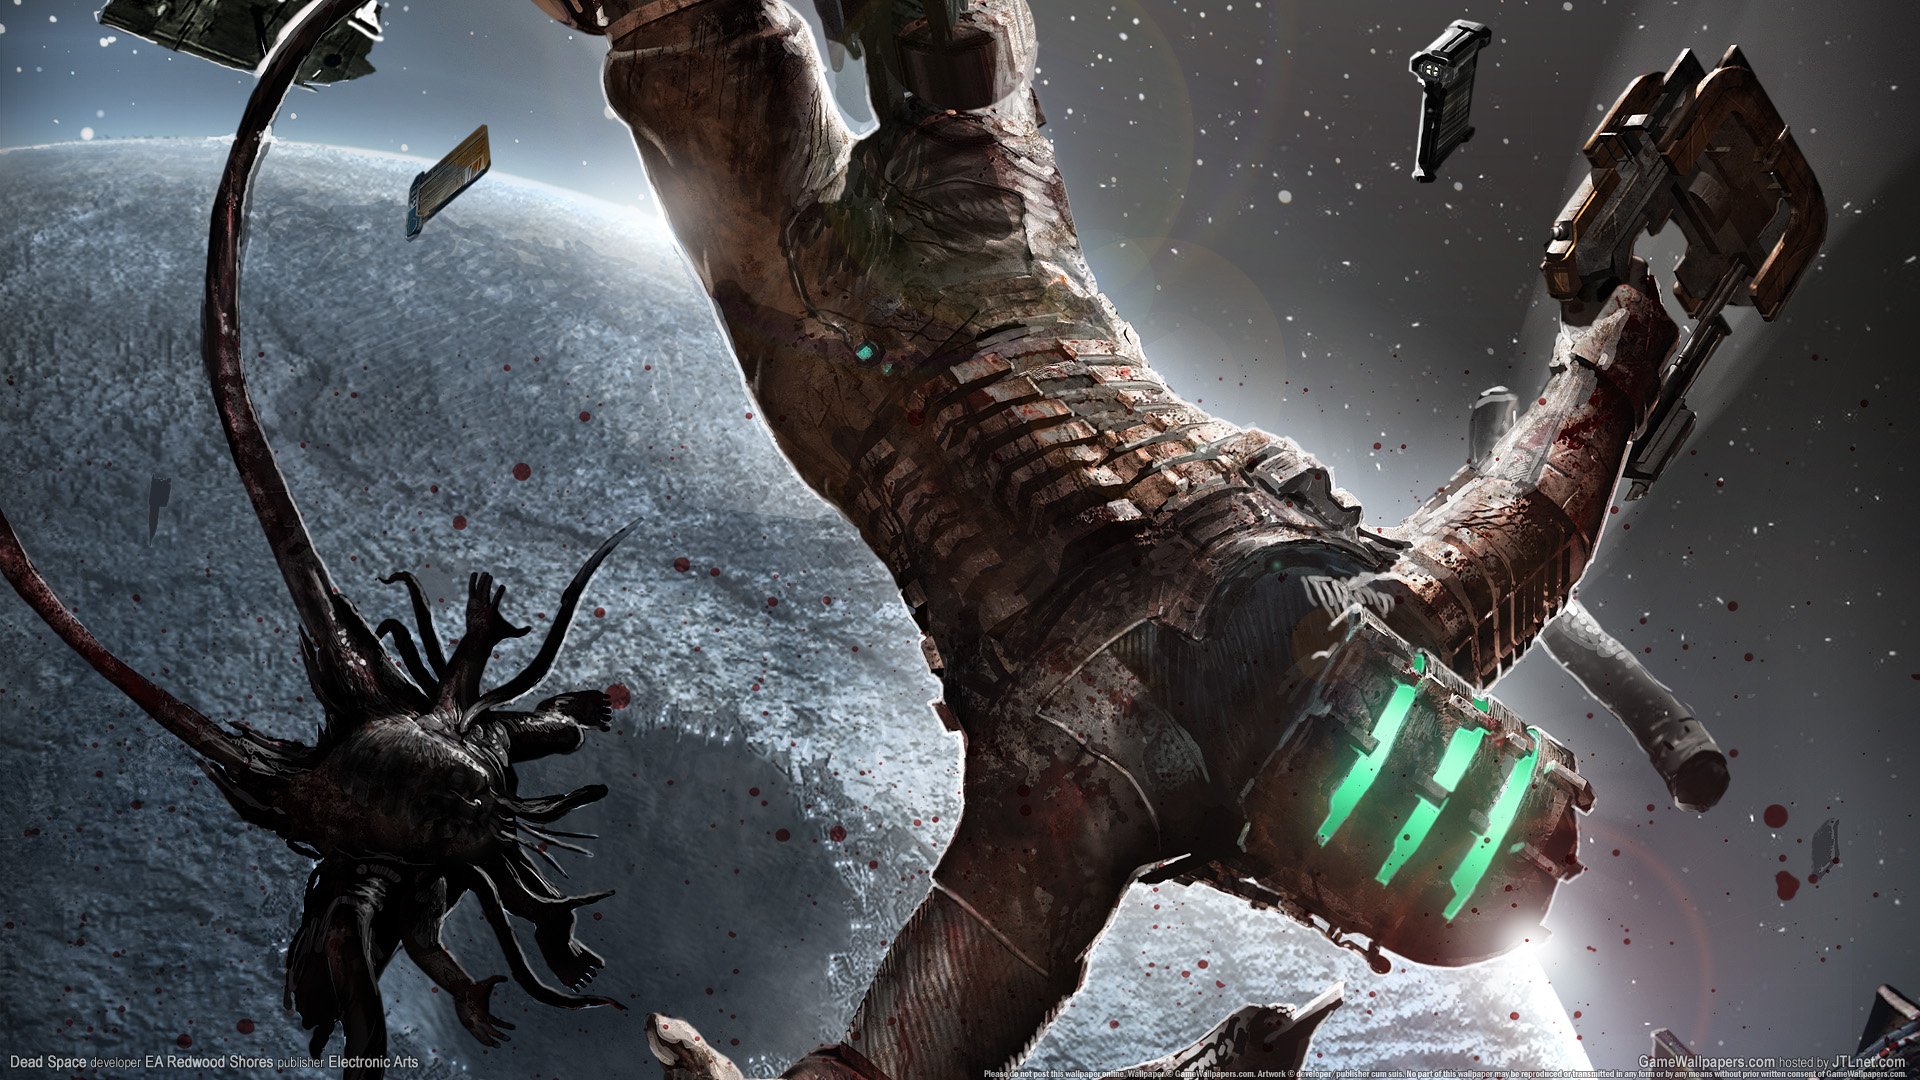 free download dead space 4